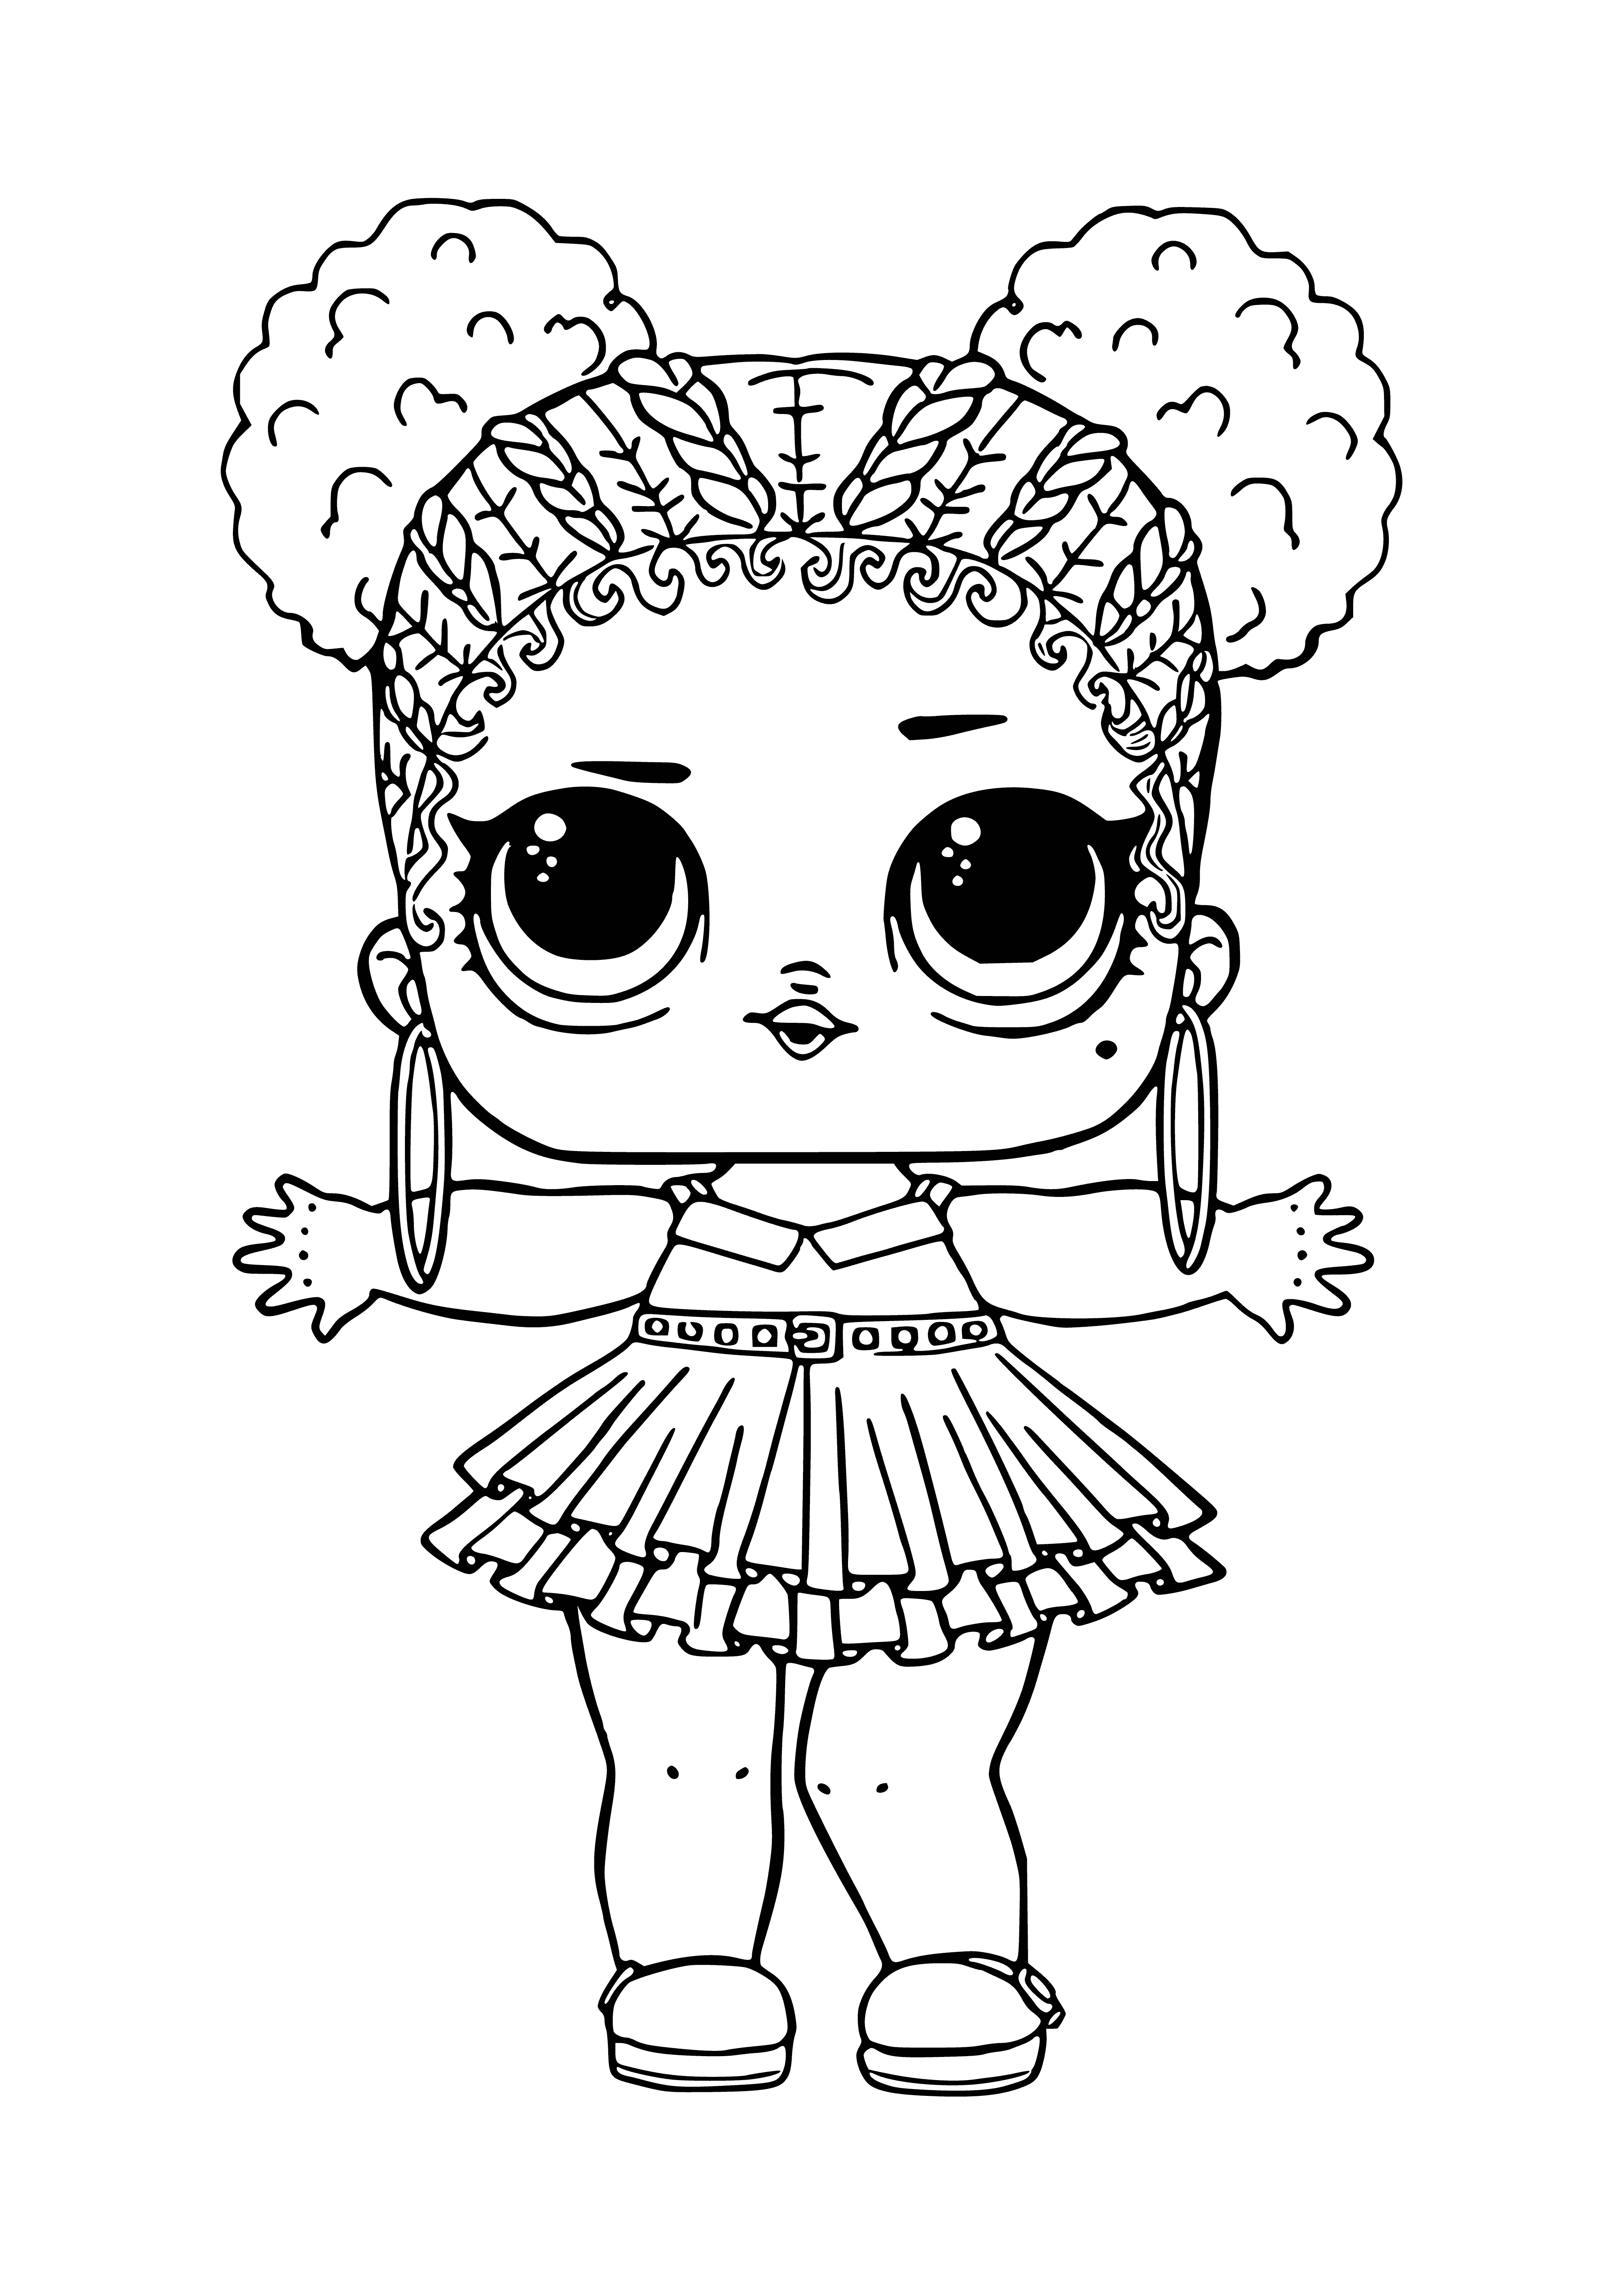 LOL Purple Queen coloring page